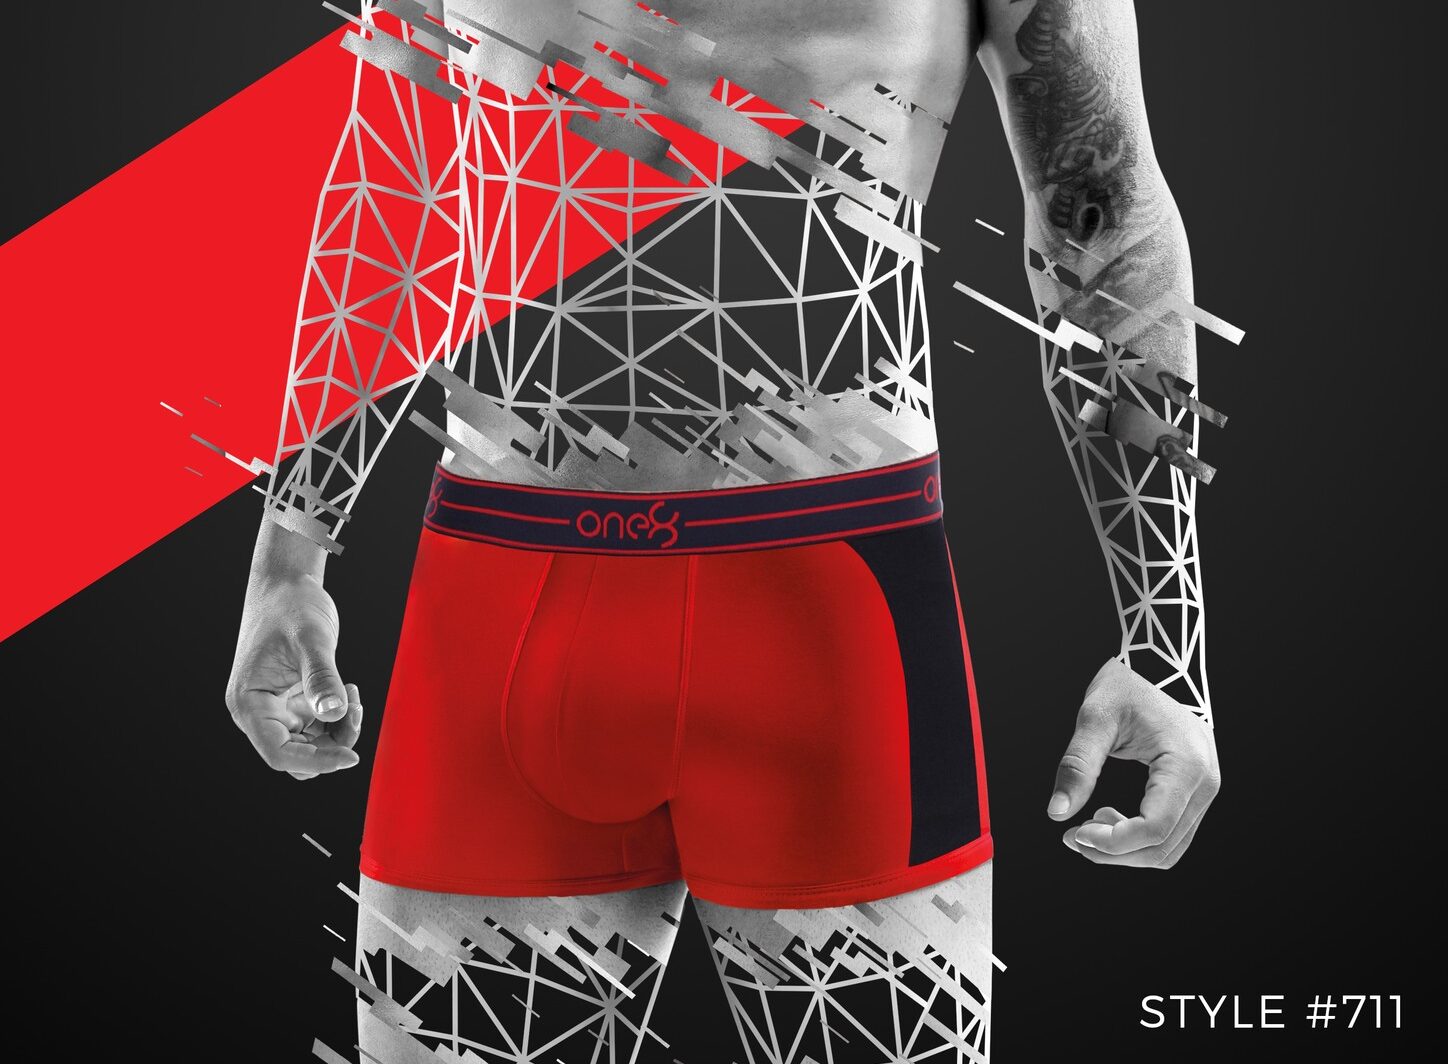 One8 innerwear launches a new collection of luxury innerwear range for men